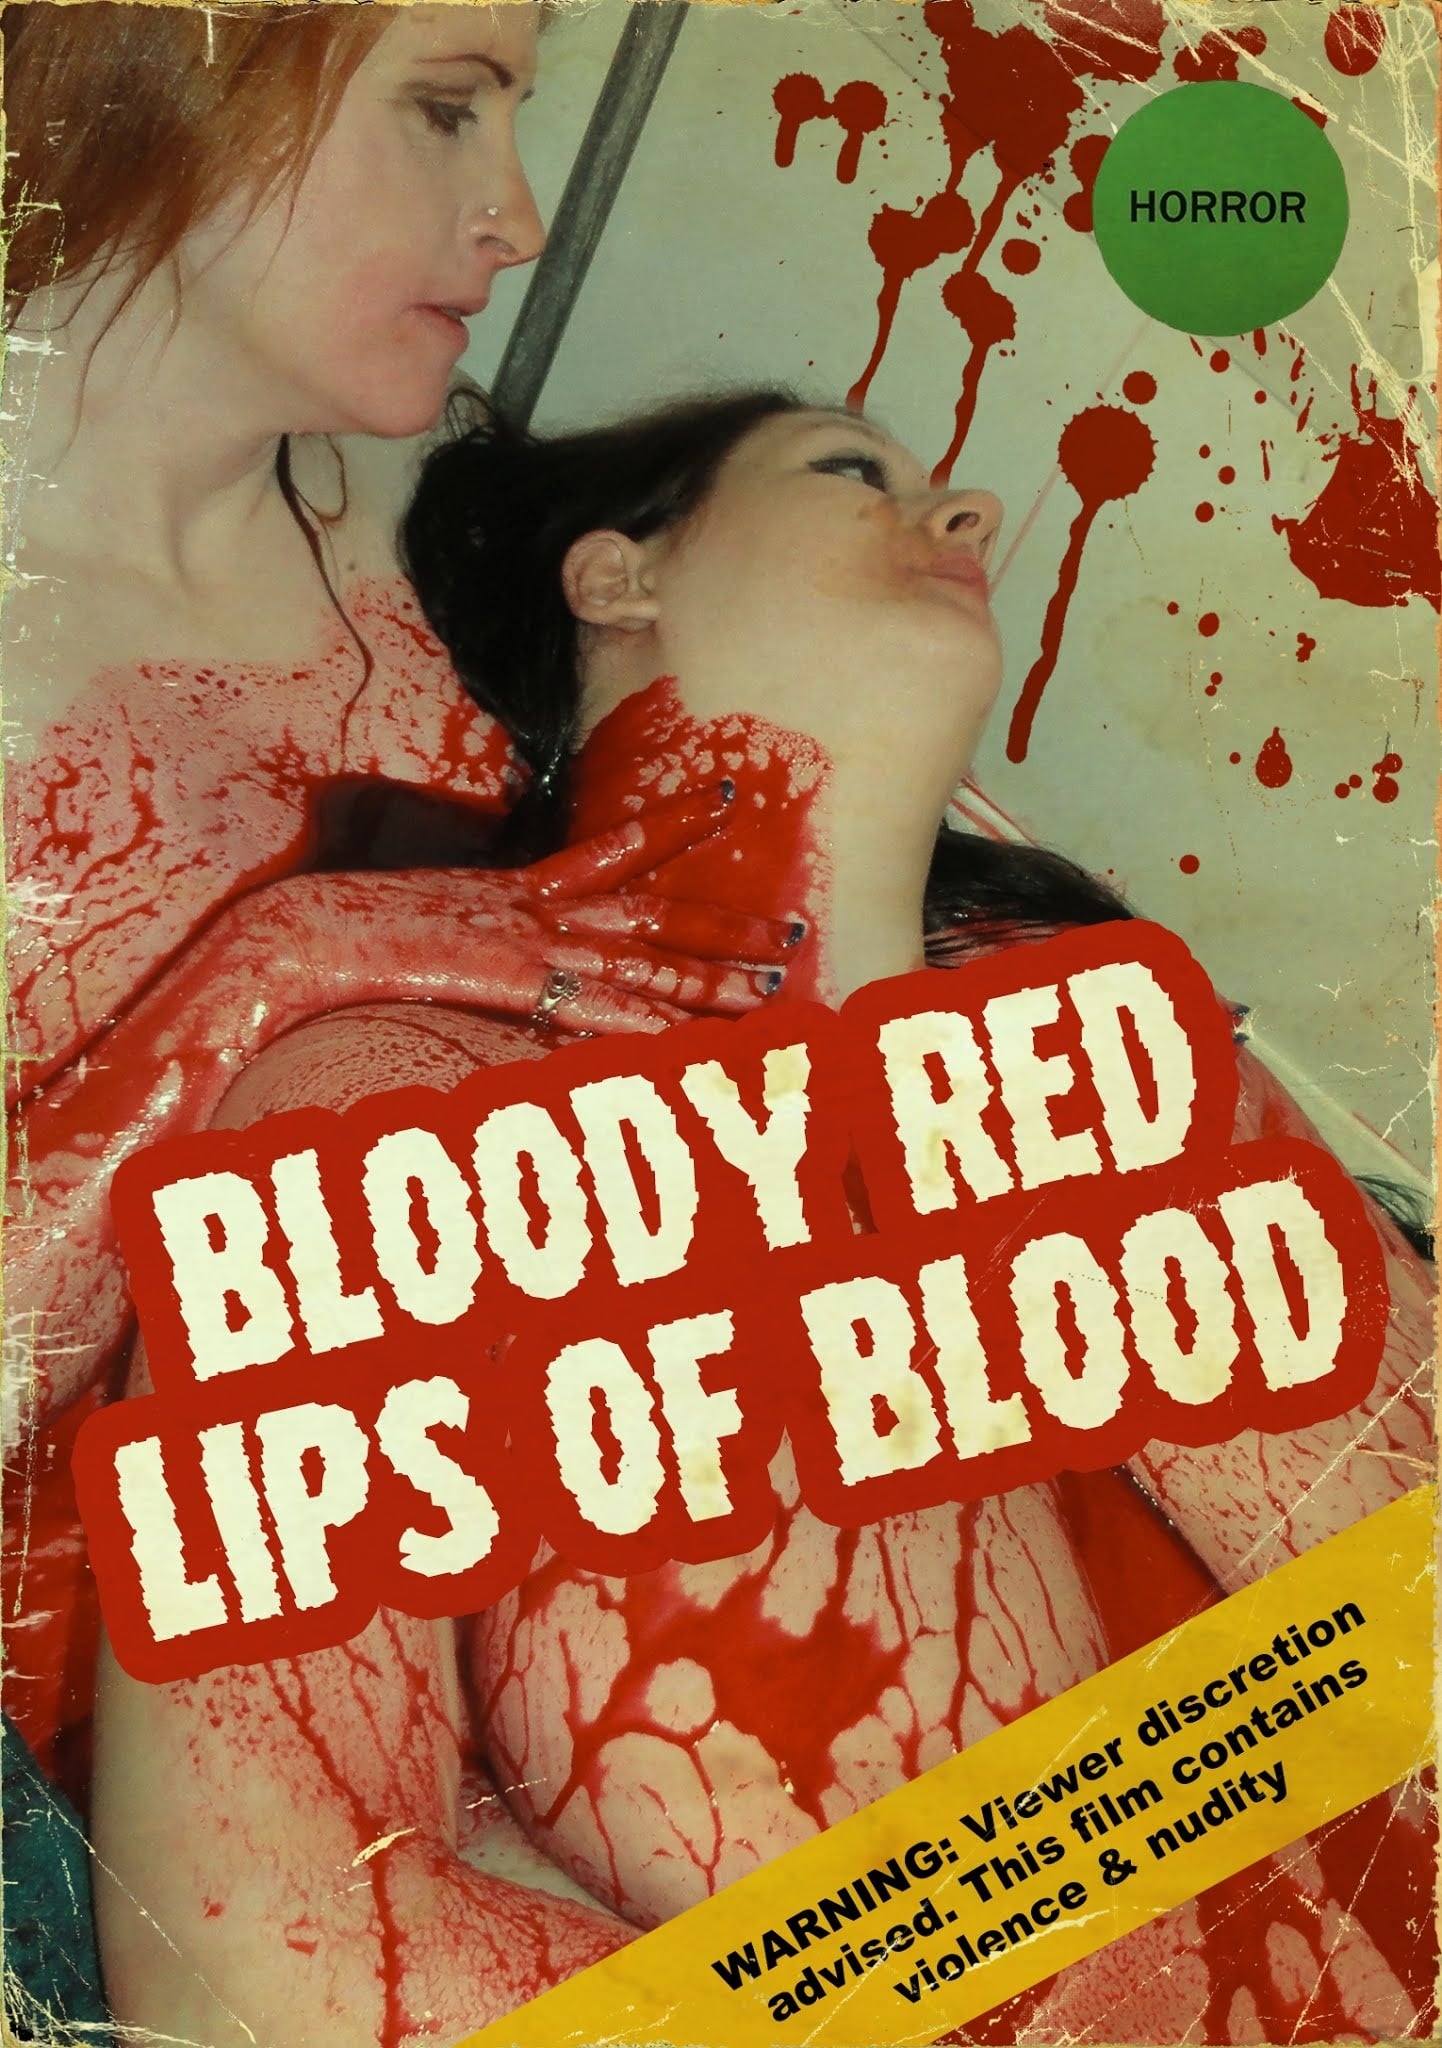 Bloody Red Lips of Blood